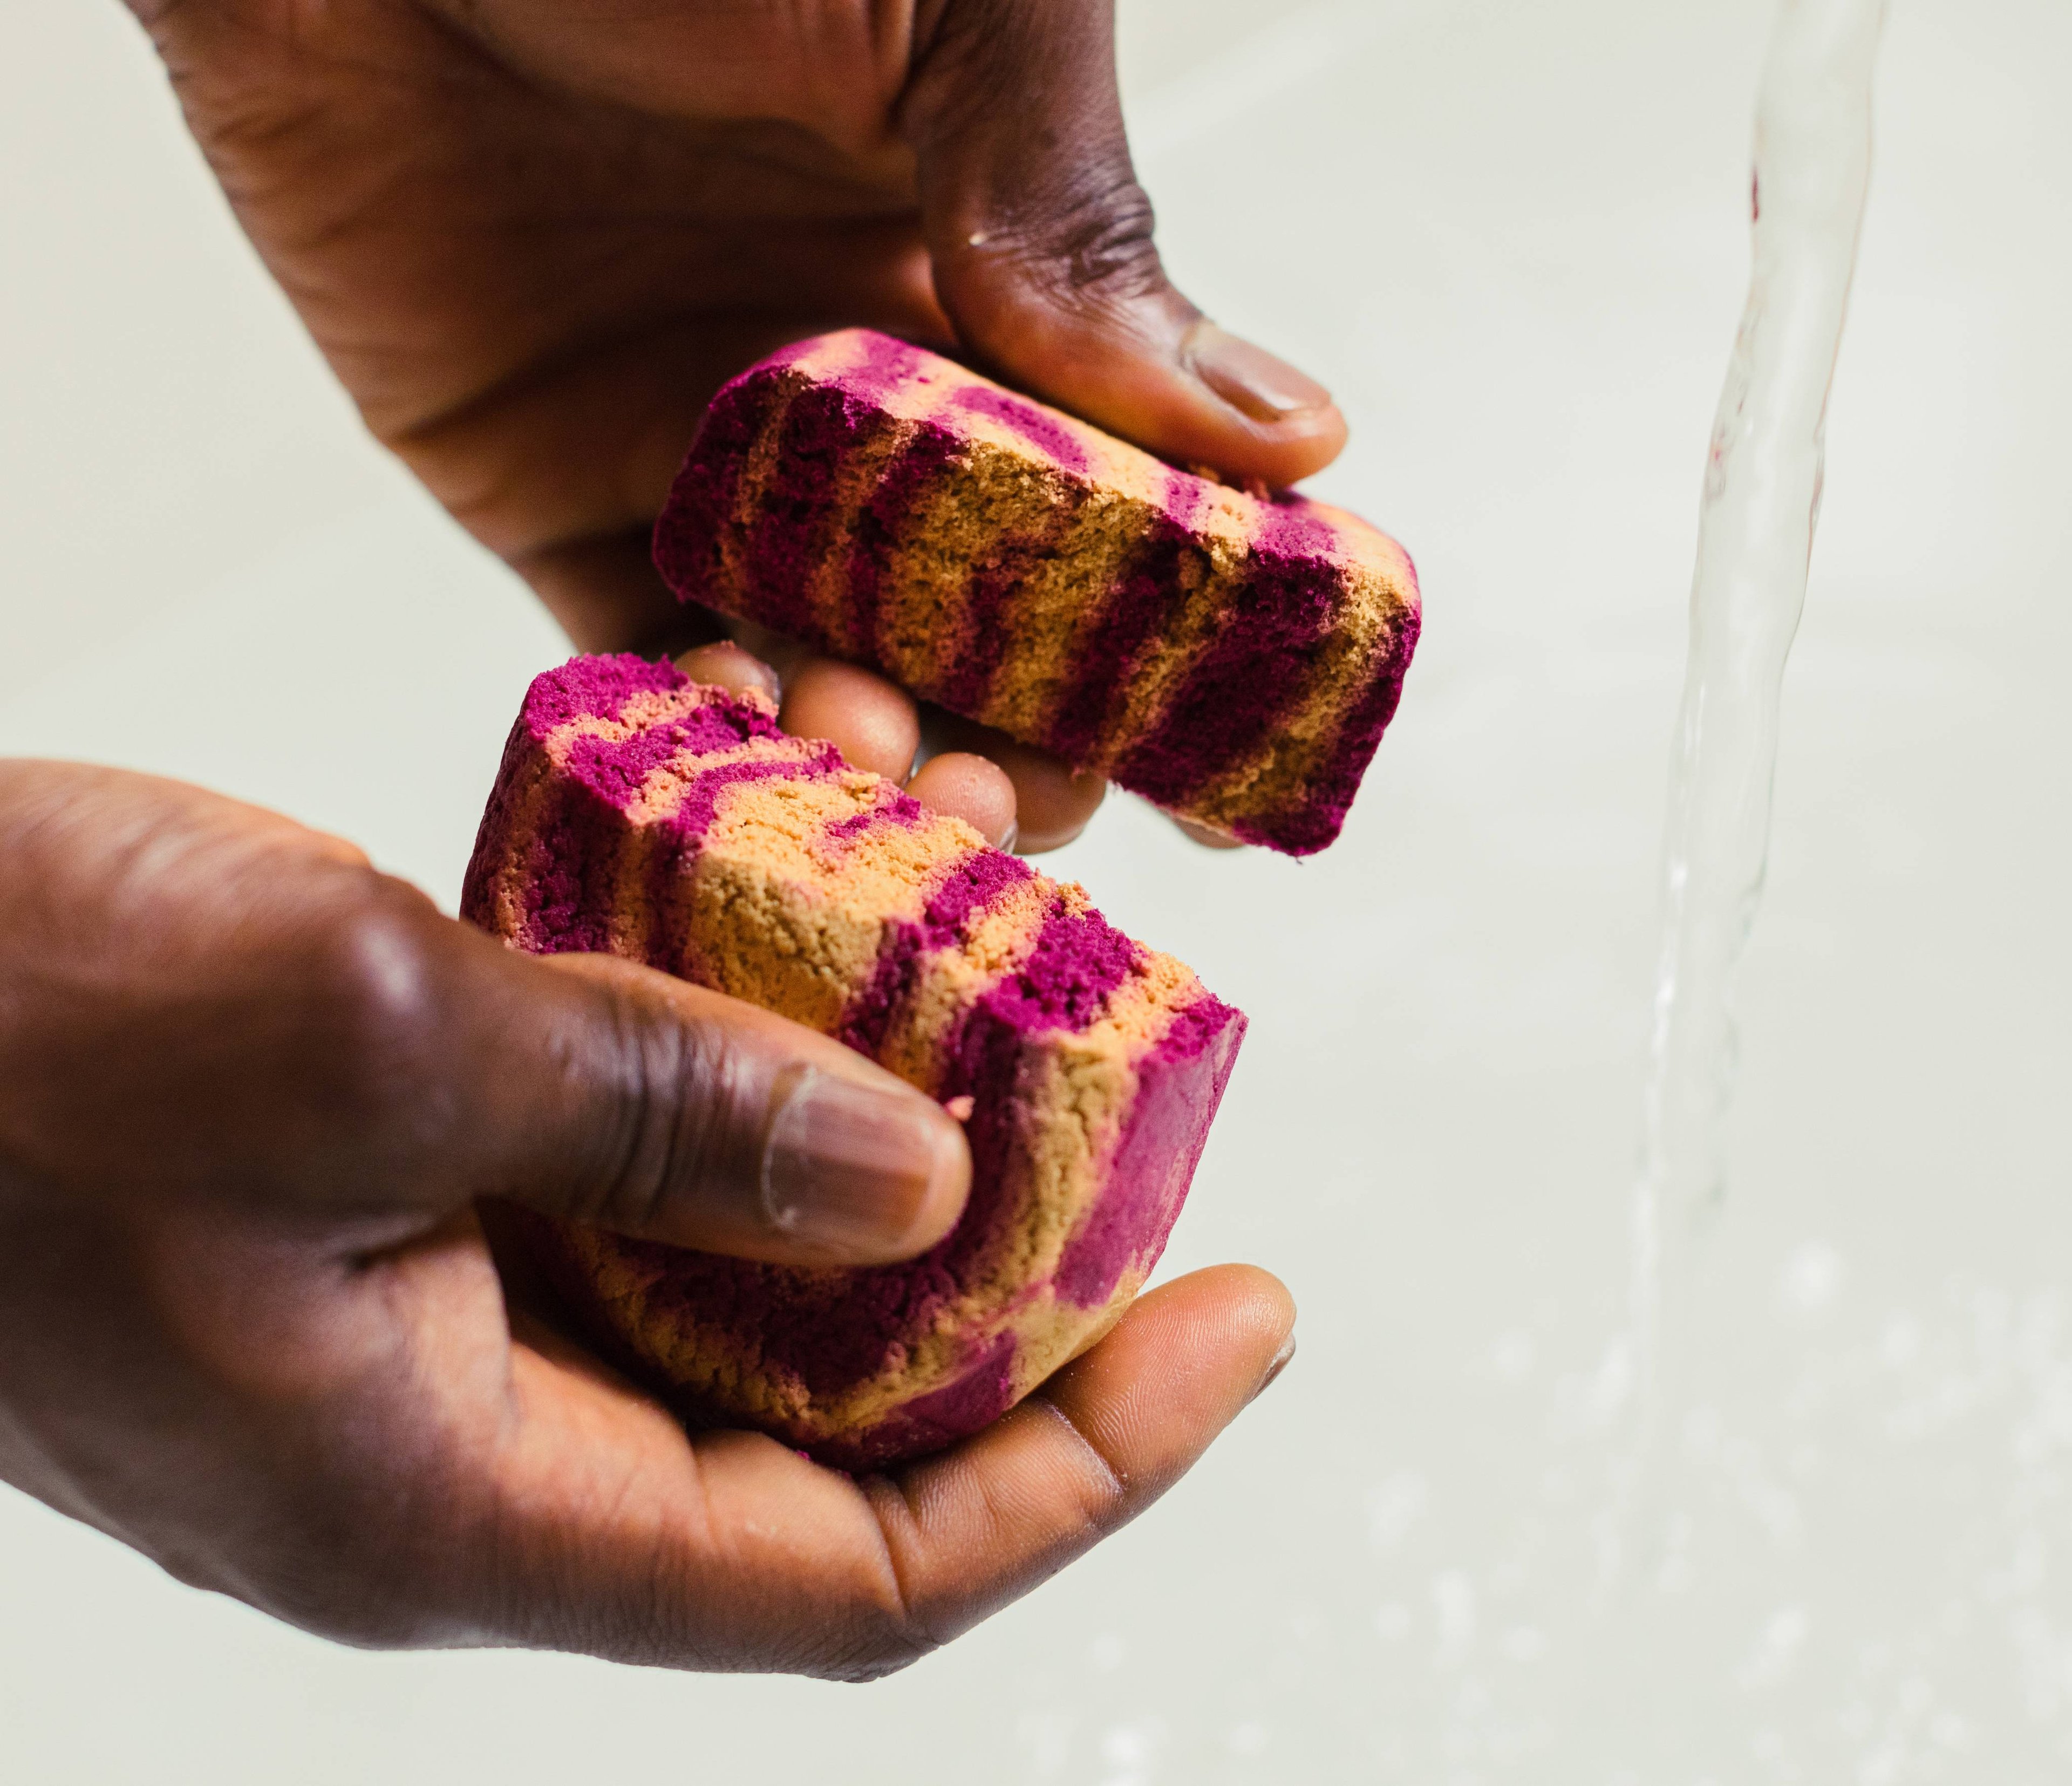 Image shows the model breaking the colourful Cinnamon Roll bubble bar in half next to a running tap. 